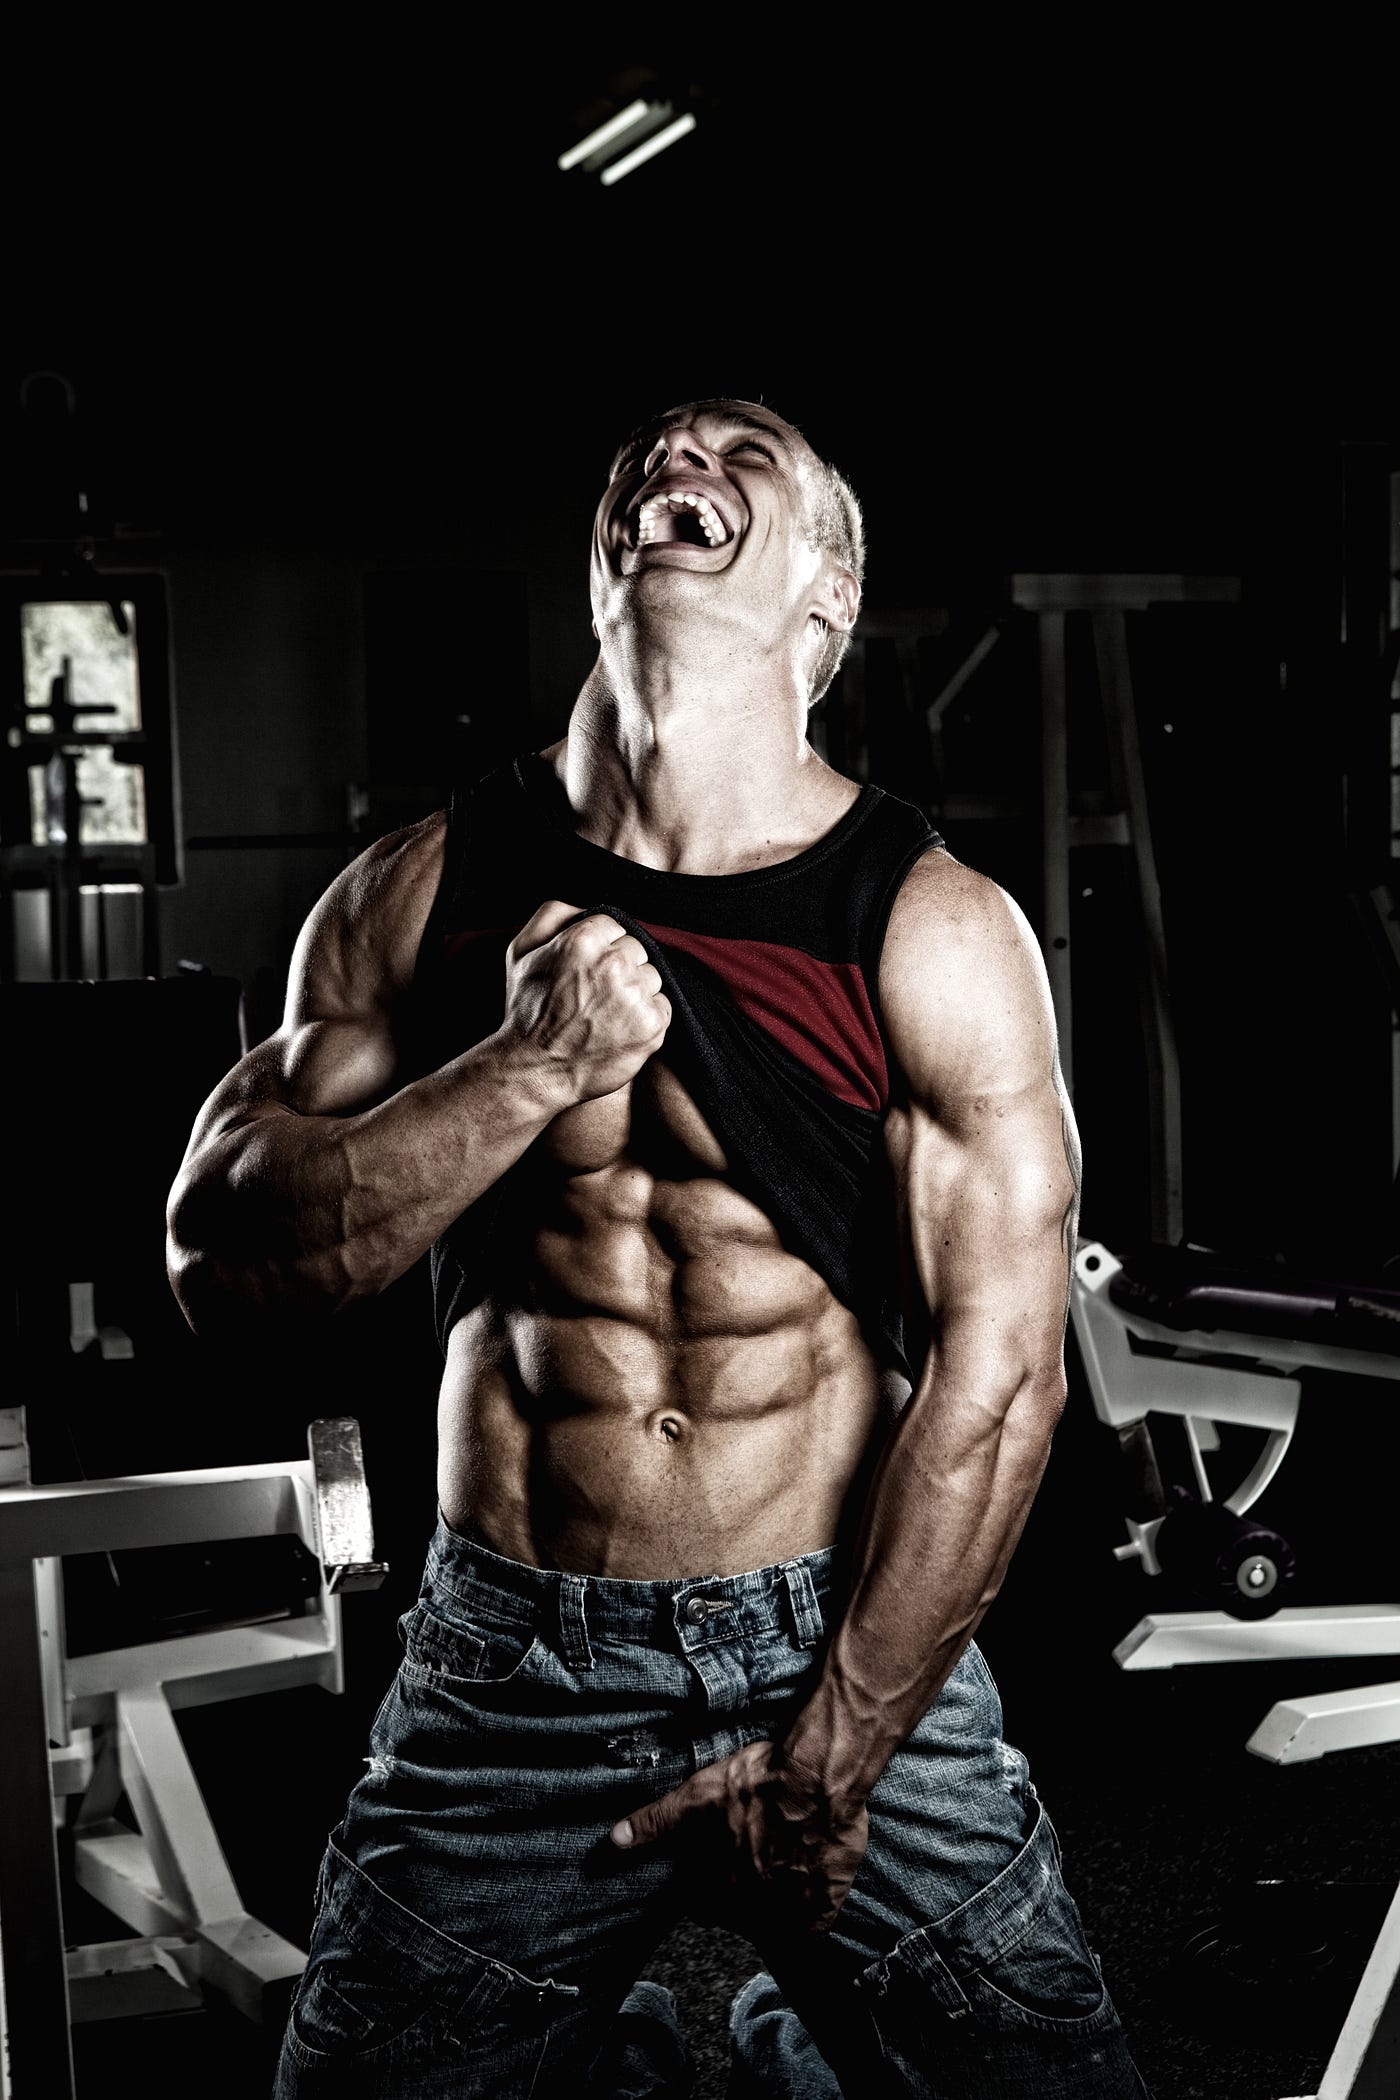 Why Do We Love 6-Pack Abs So Damn Much?, by Jamie D Stacey